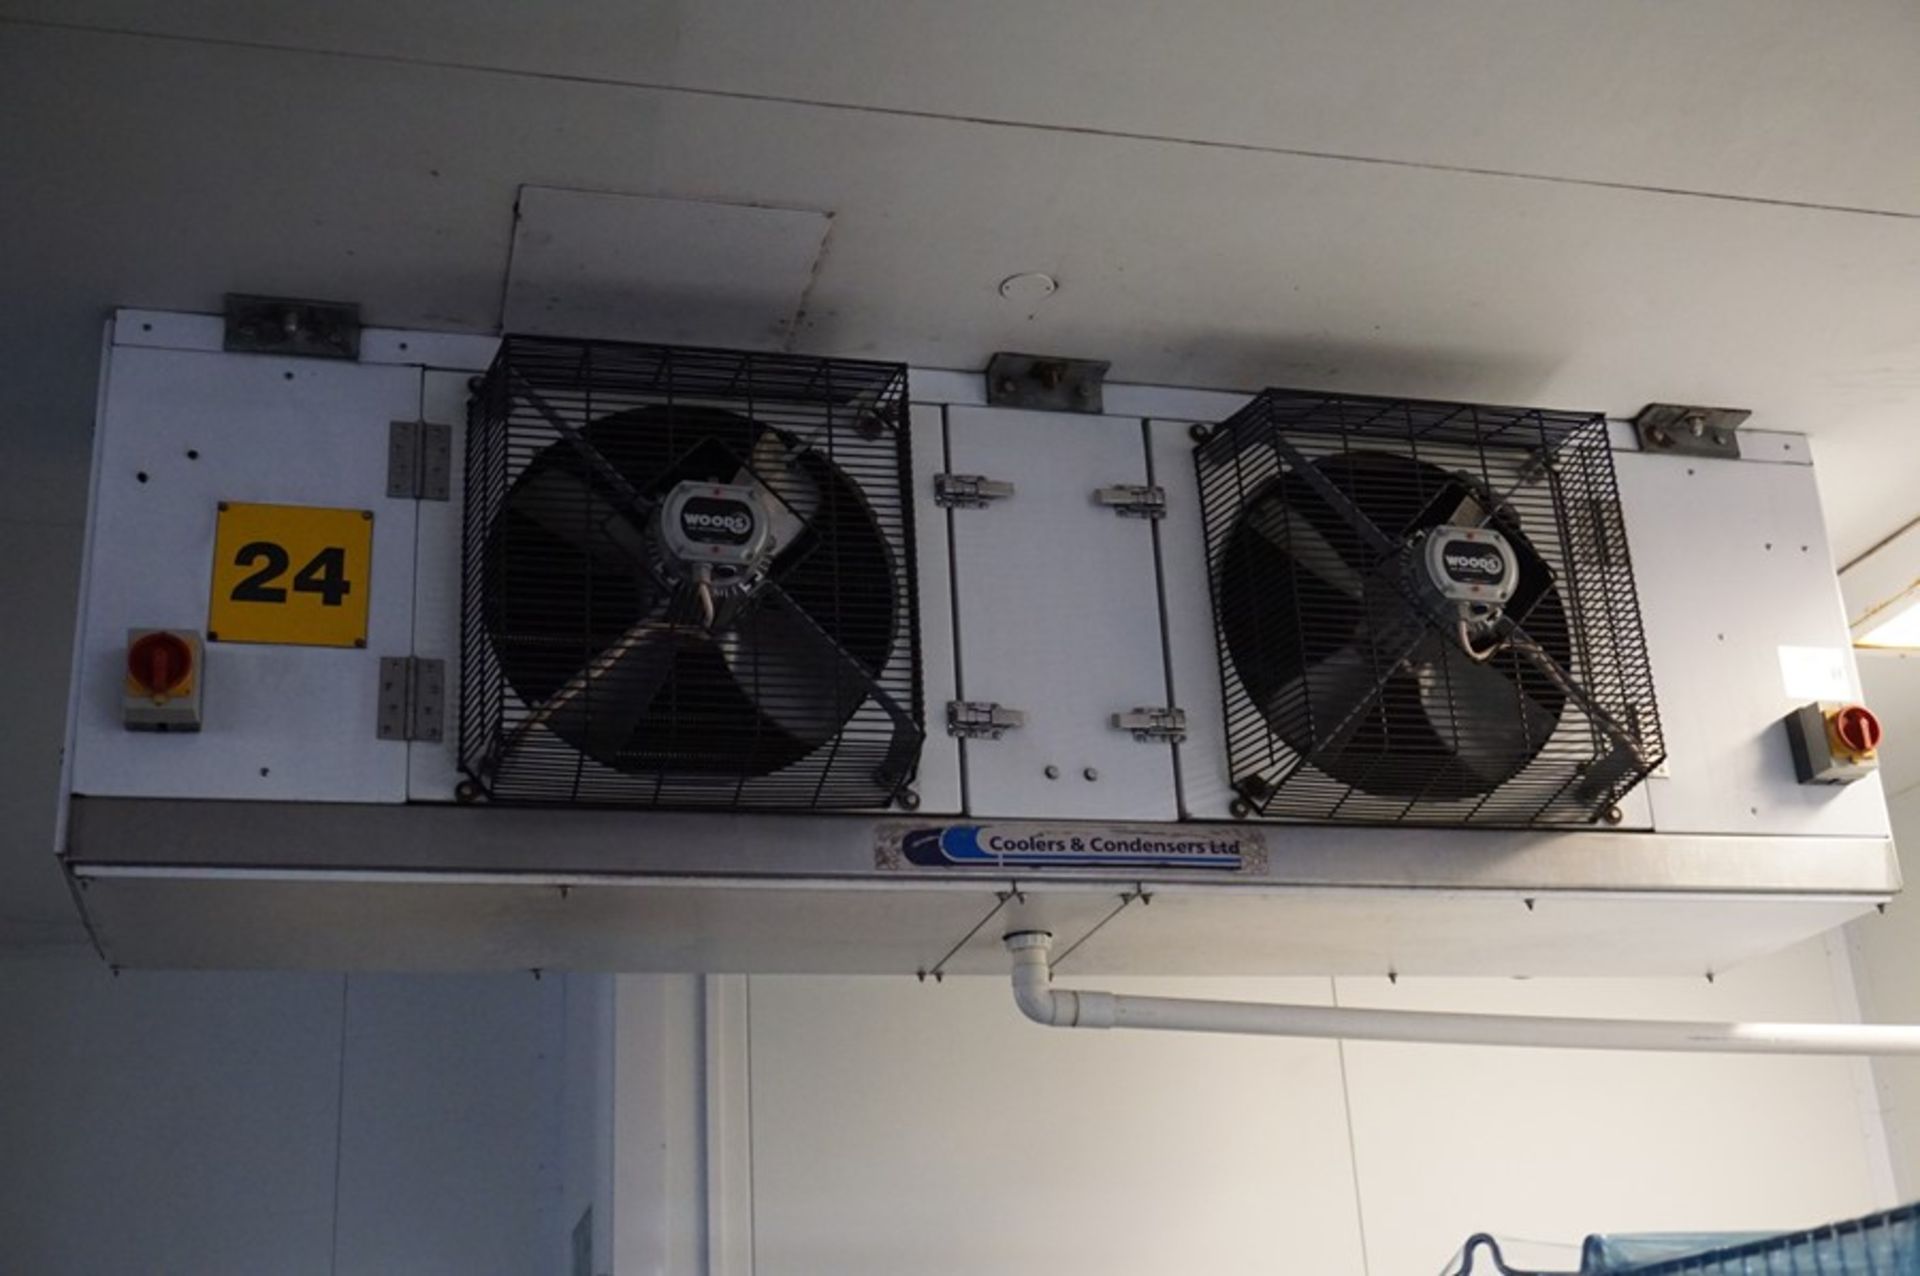 Coolers & Condensers, Model: CA10, twin fan chiller unit, Serial No. SOP009219 (1998) (Lift out - Image 3 of 4